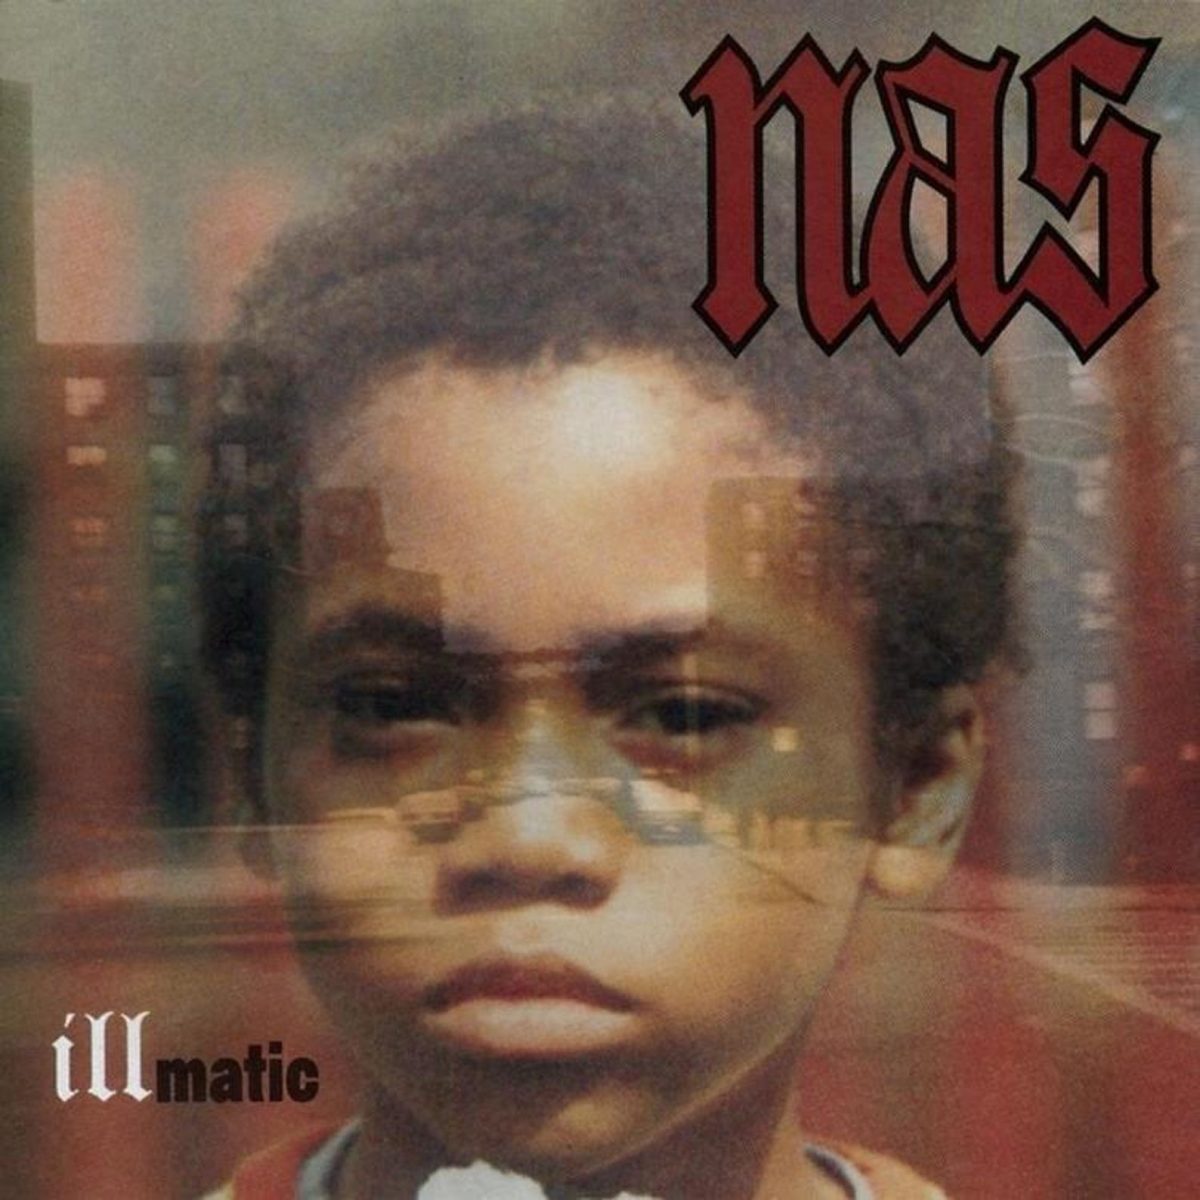 The cover for Nas debut album Illmatic, released in 1994.